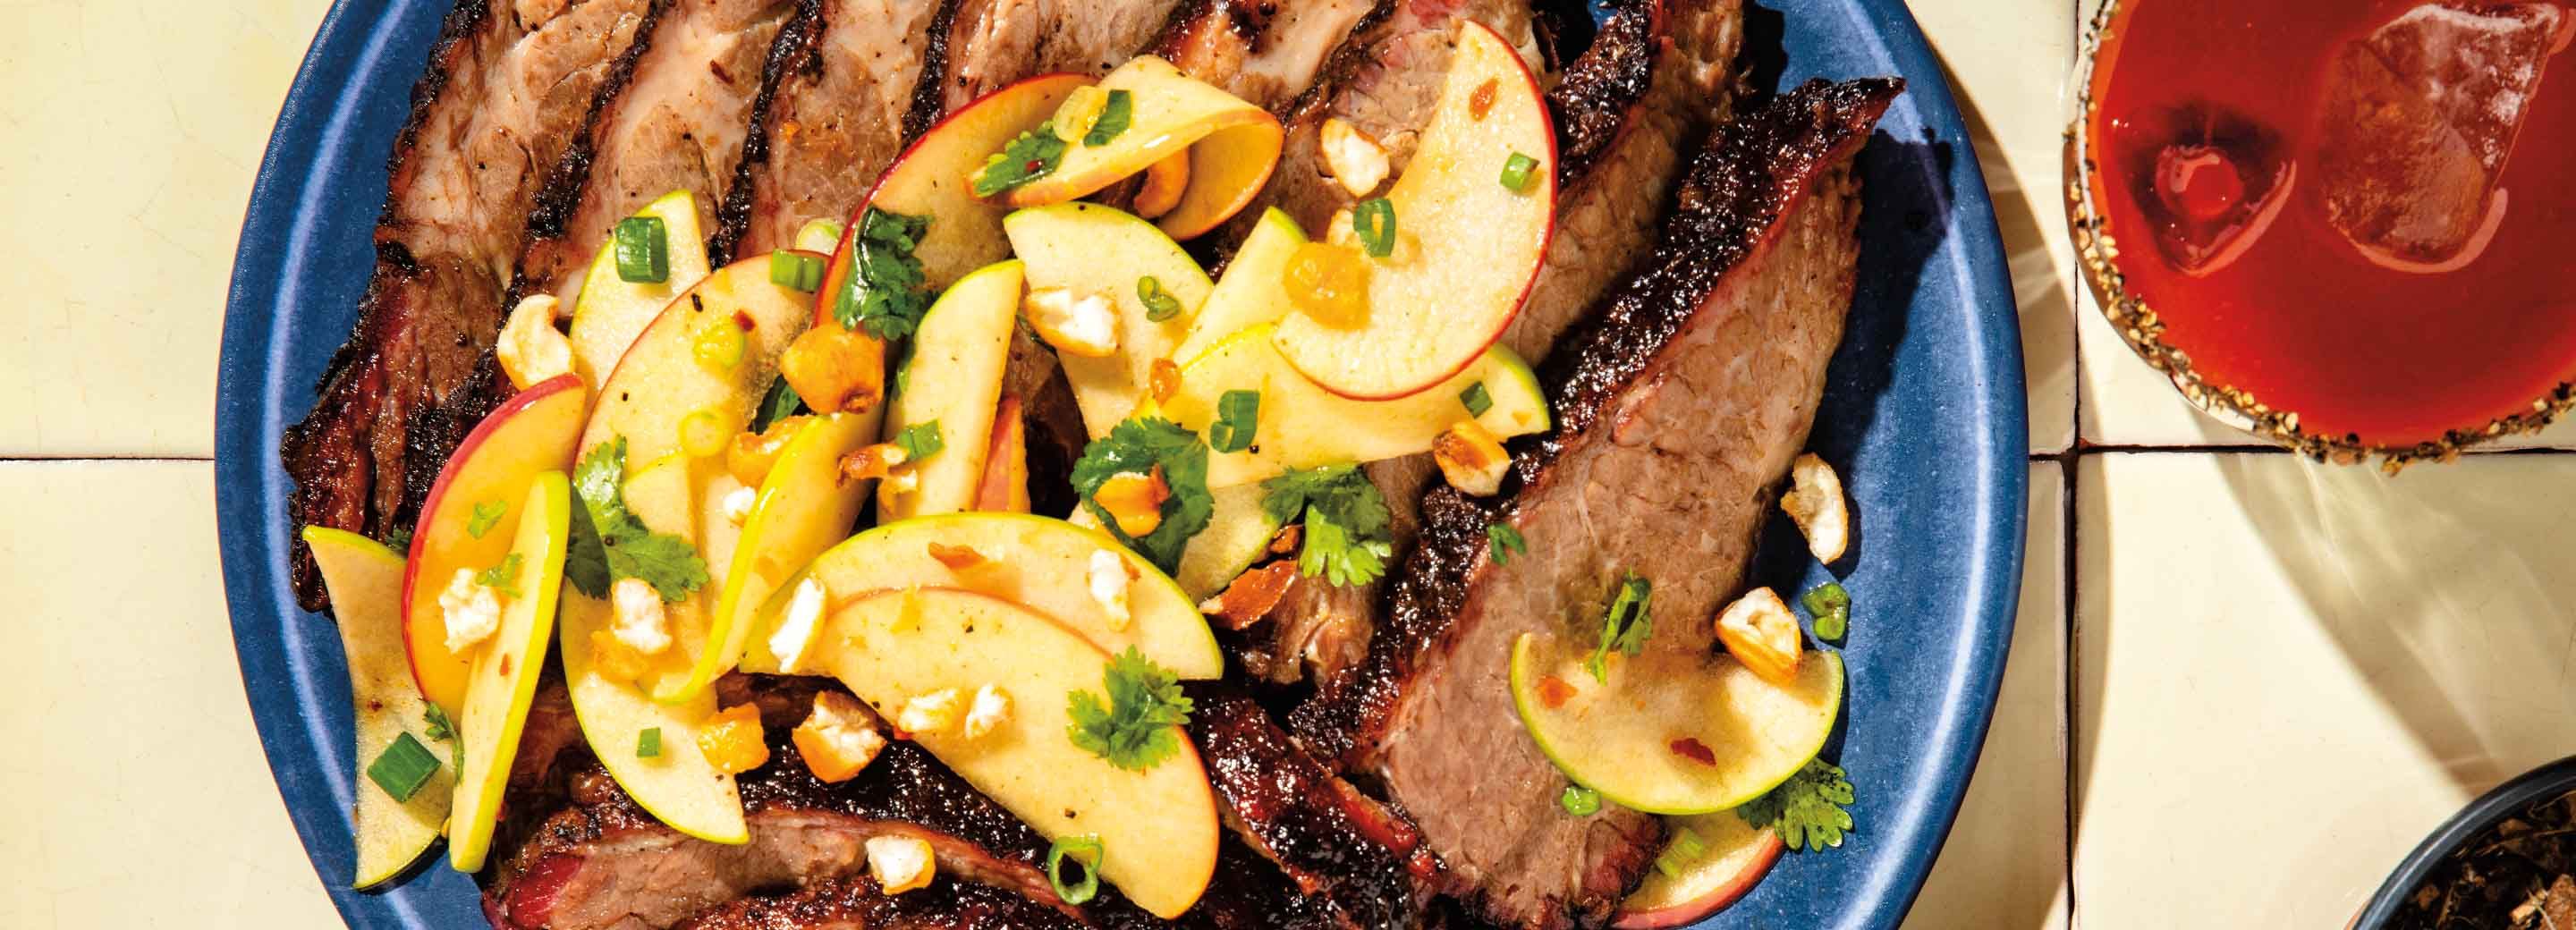 Grilled Beef Brisket with Spicy Apple Slaw